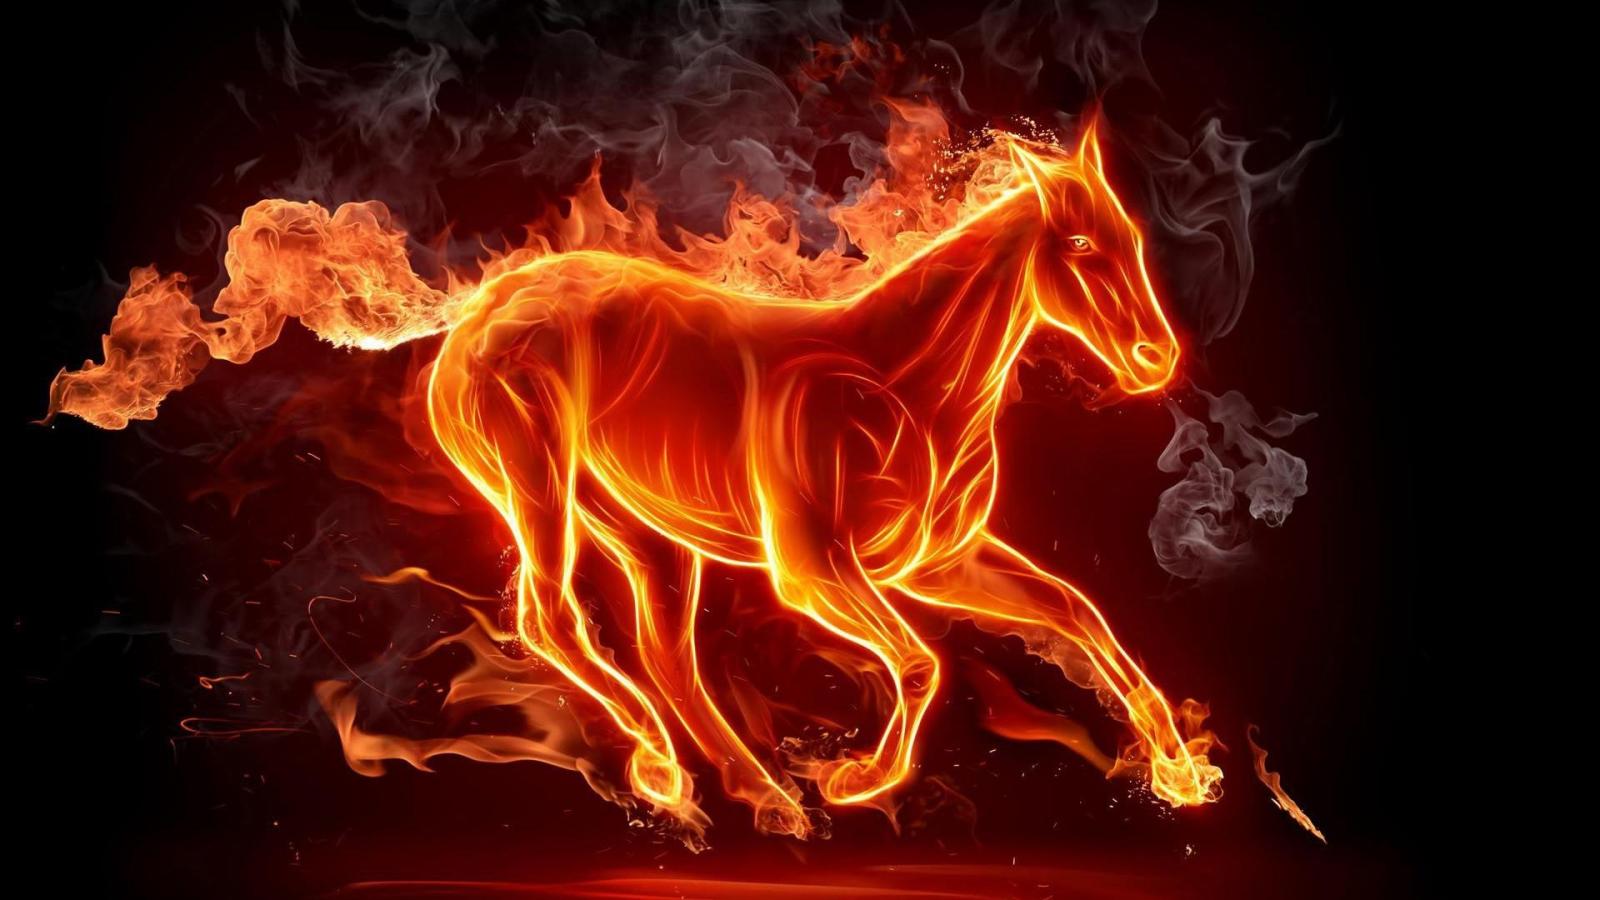 Fire horse awesome wallpaper hd 1080p - (#64474) - High Quality ...